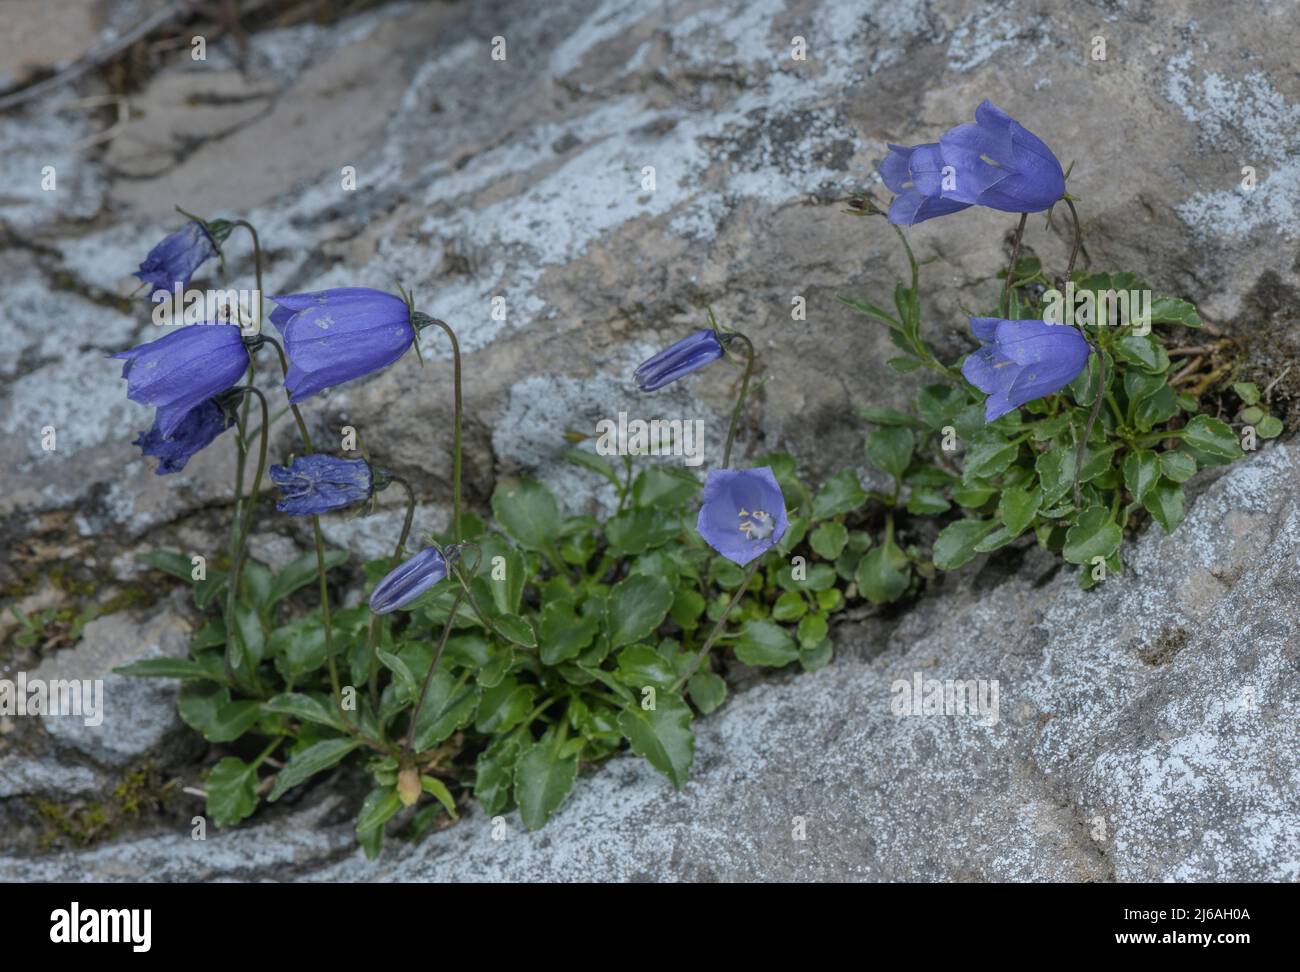 Fairy's-thimble, Campanula cochleariifolia, in flower in rock crevice, Austrian Alps. Stock Photo